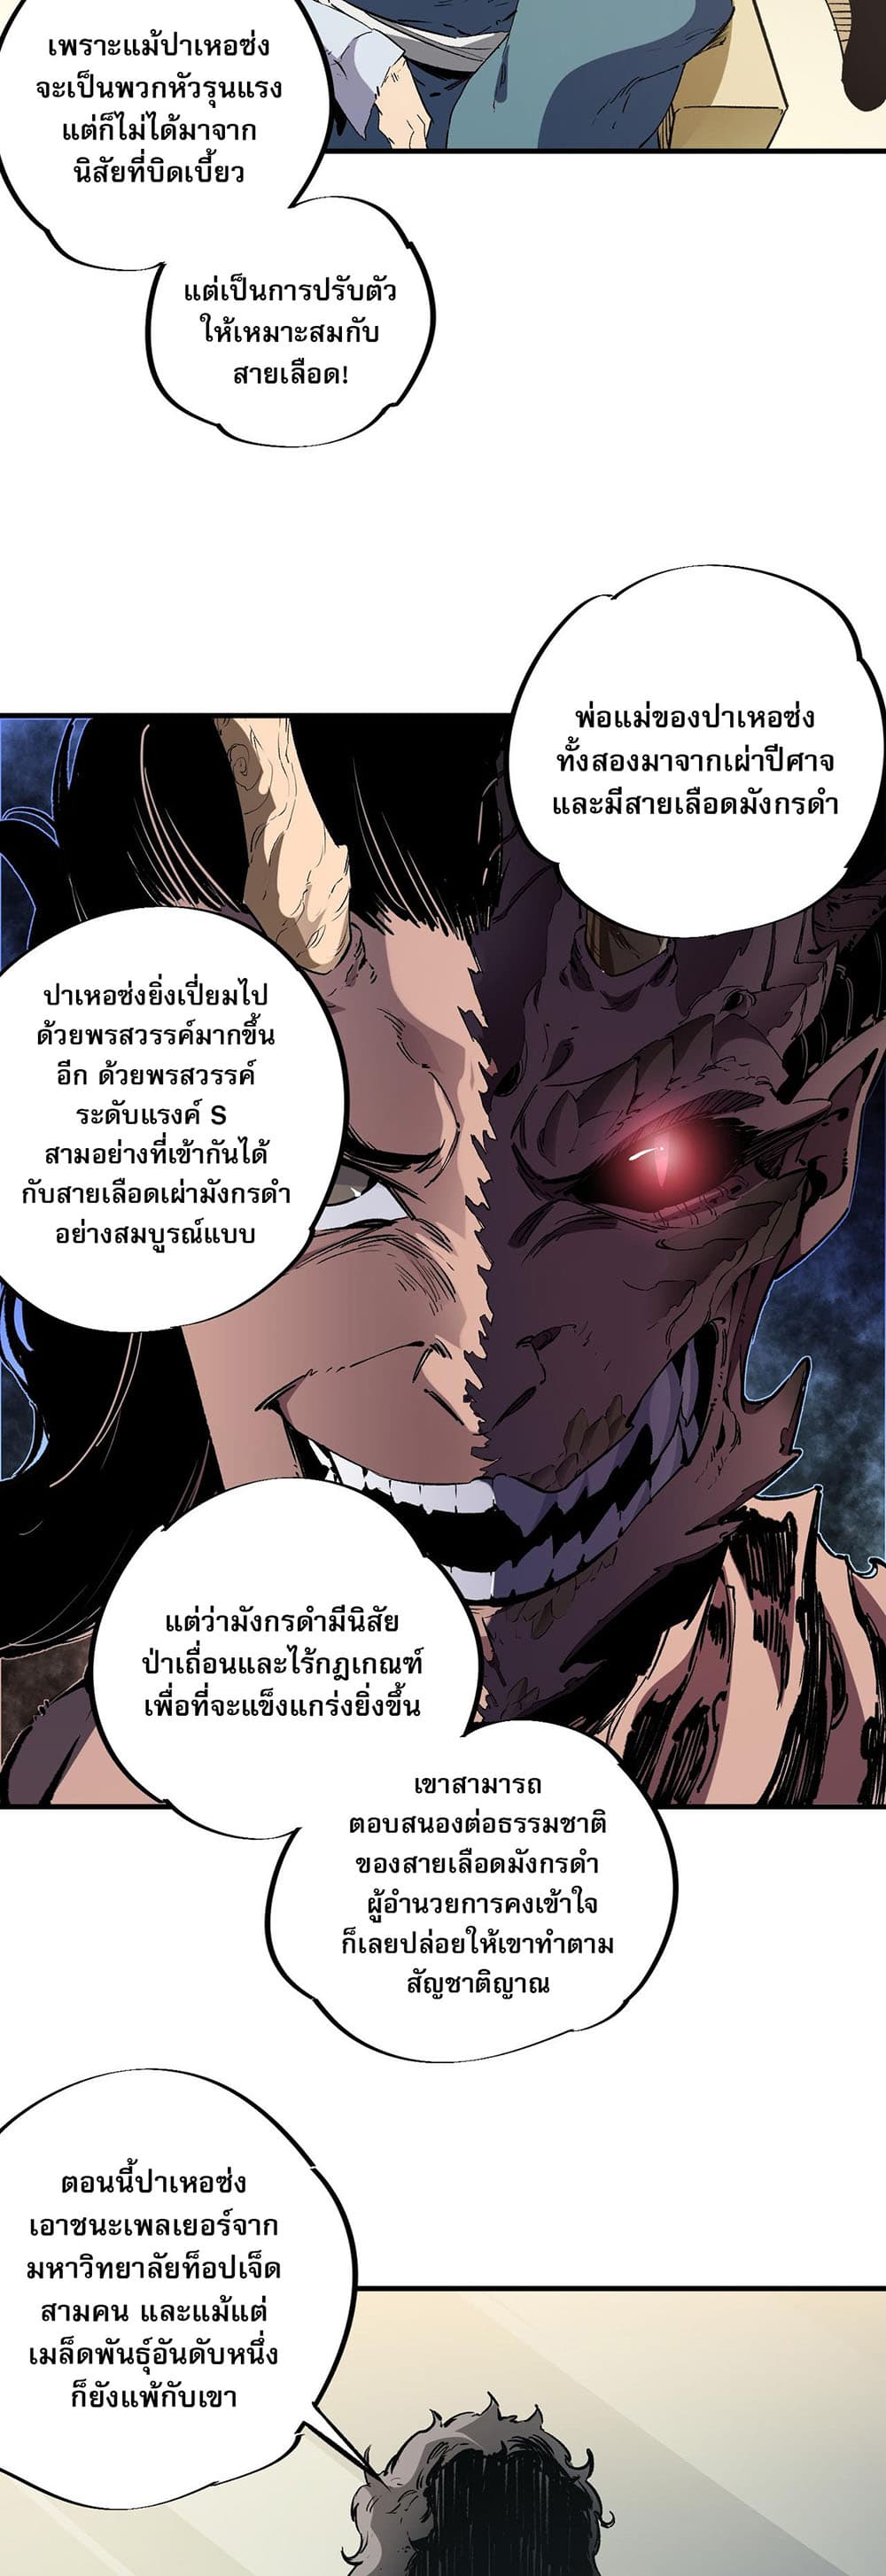 Job Changing for the Entire Population: The Jobless Me Will Terminate the Gods ฉันคือผู้เล่นไร้อาชีพที่สังหารเหล่าเทพ 30-30